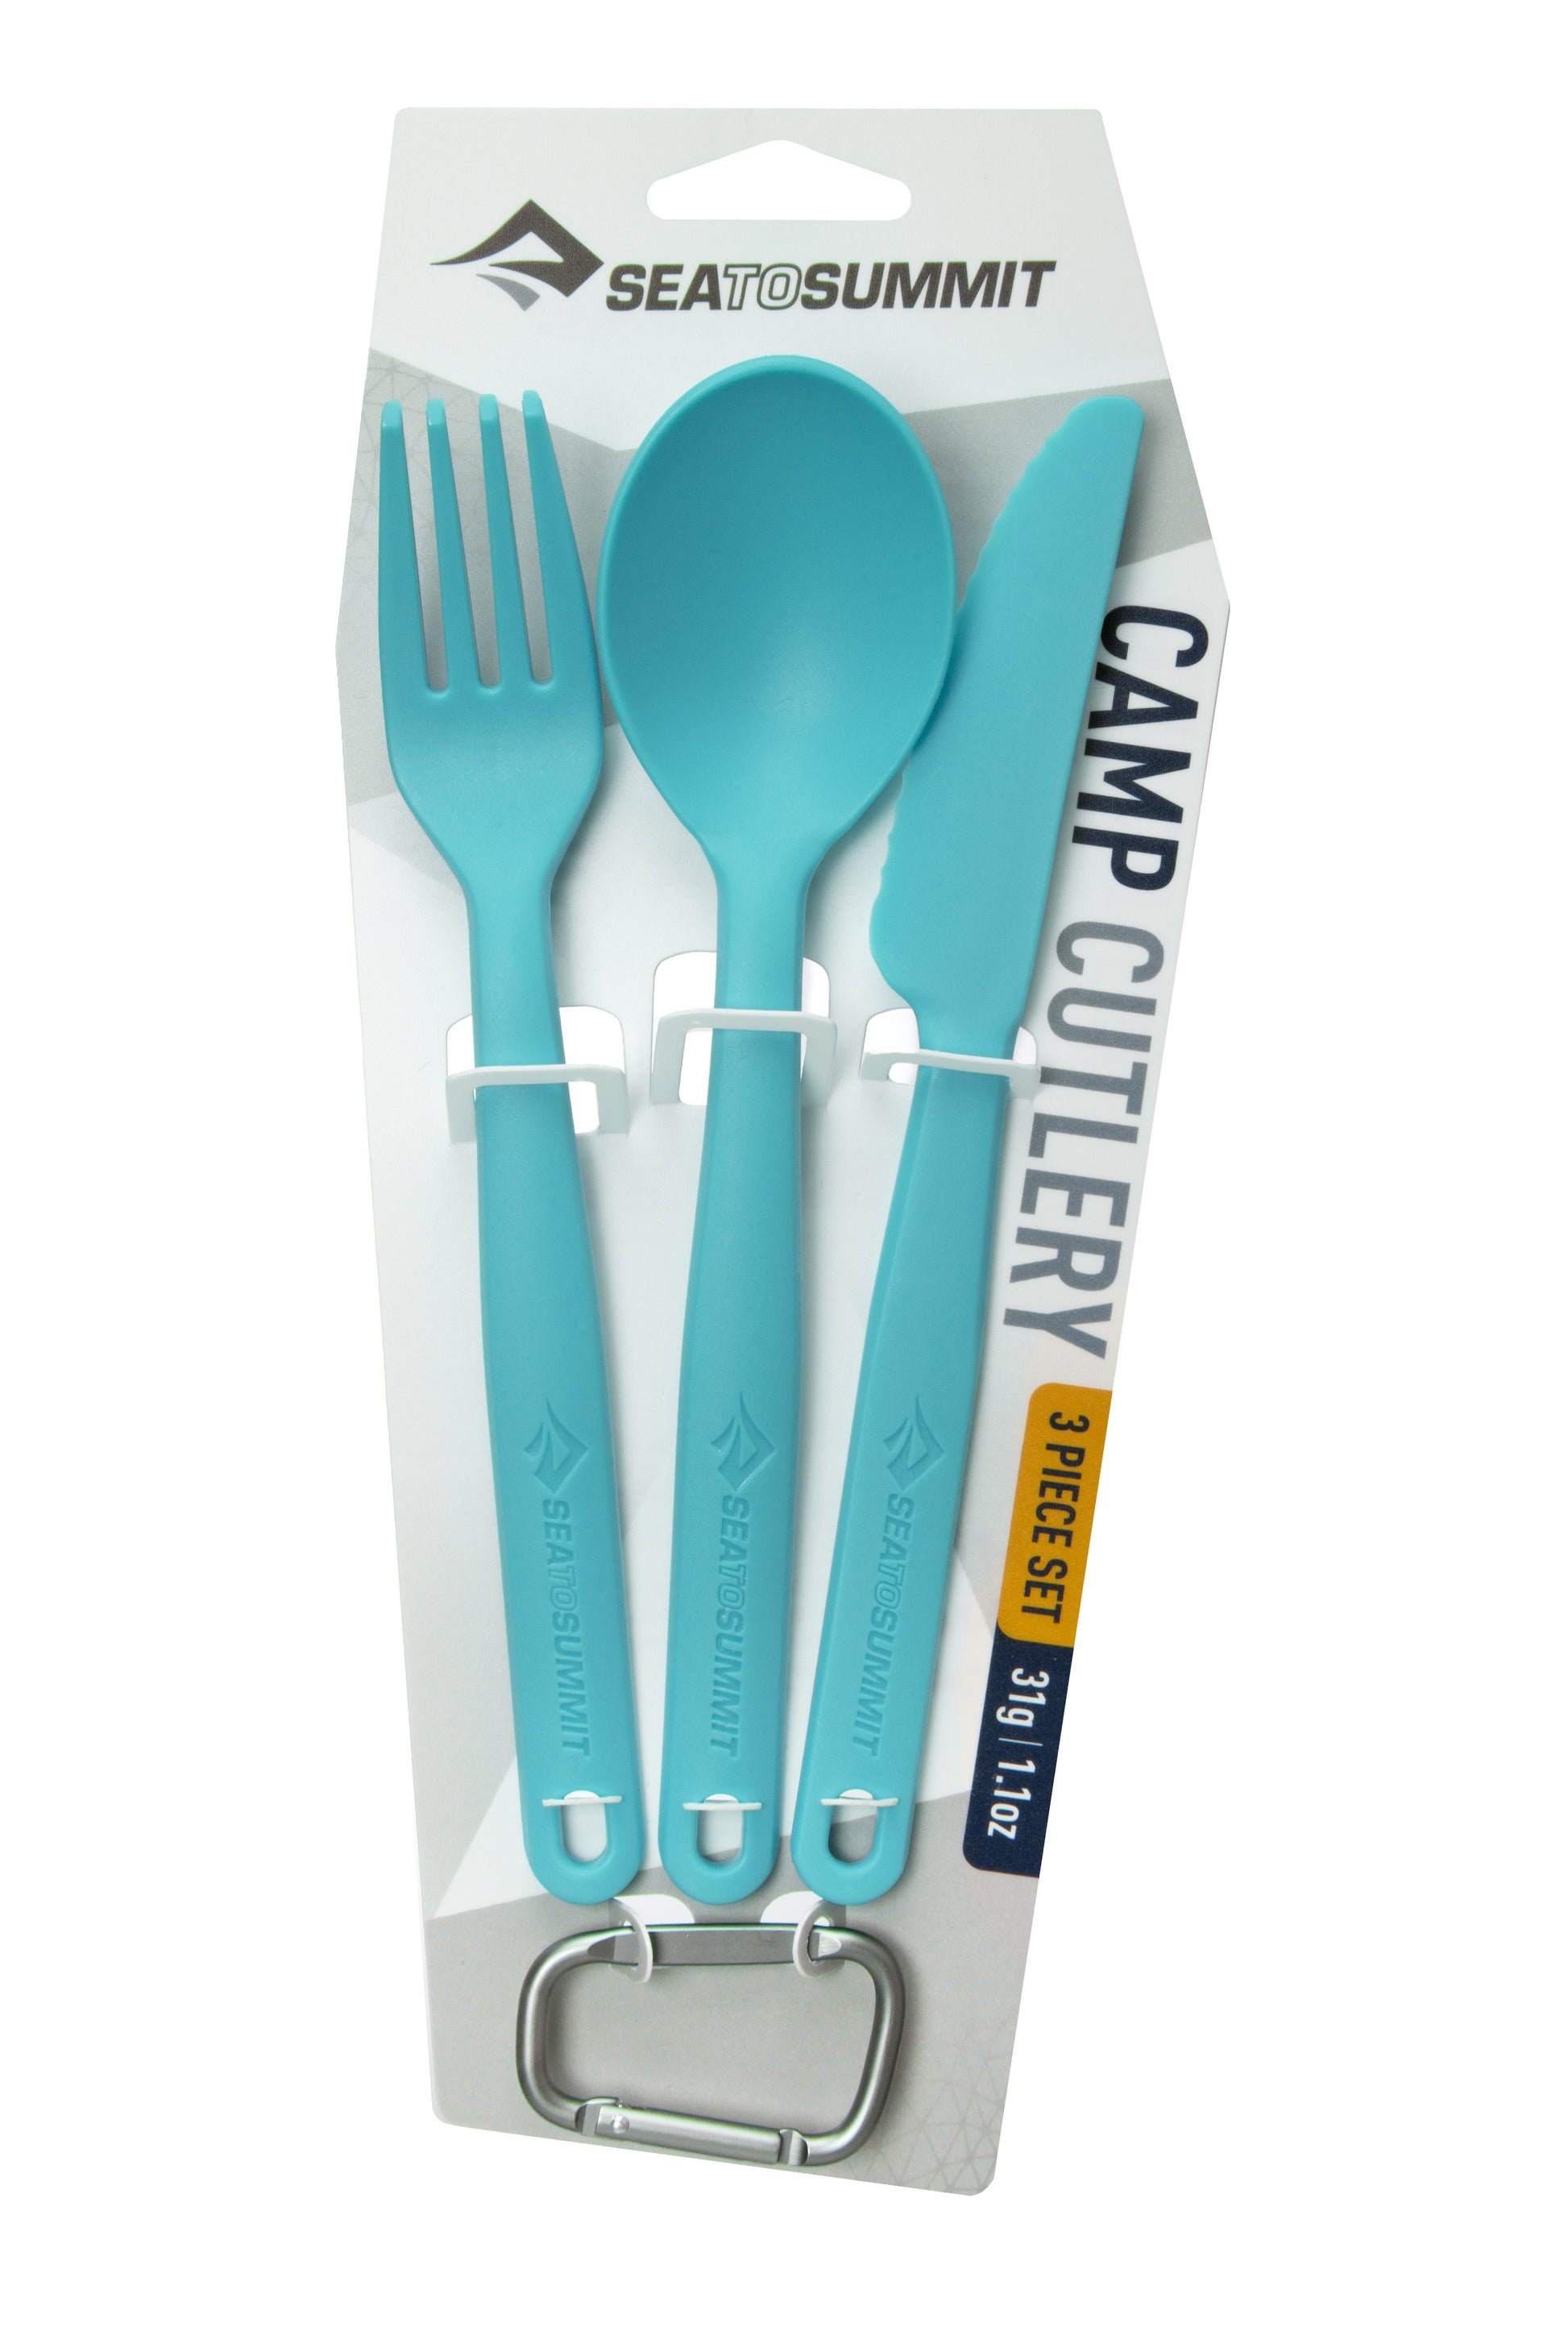 S2S Camp Cutlery Set 3 piece Pacific Blue - BBQ DXB